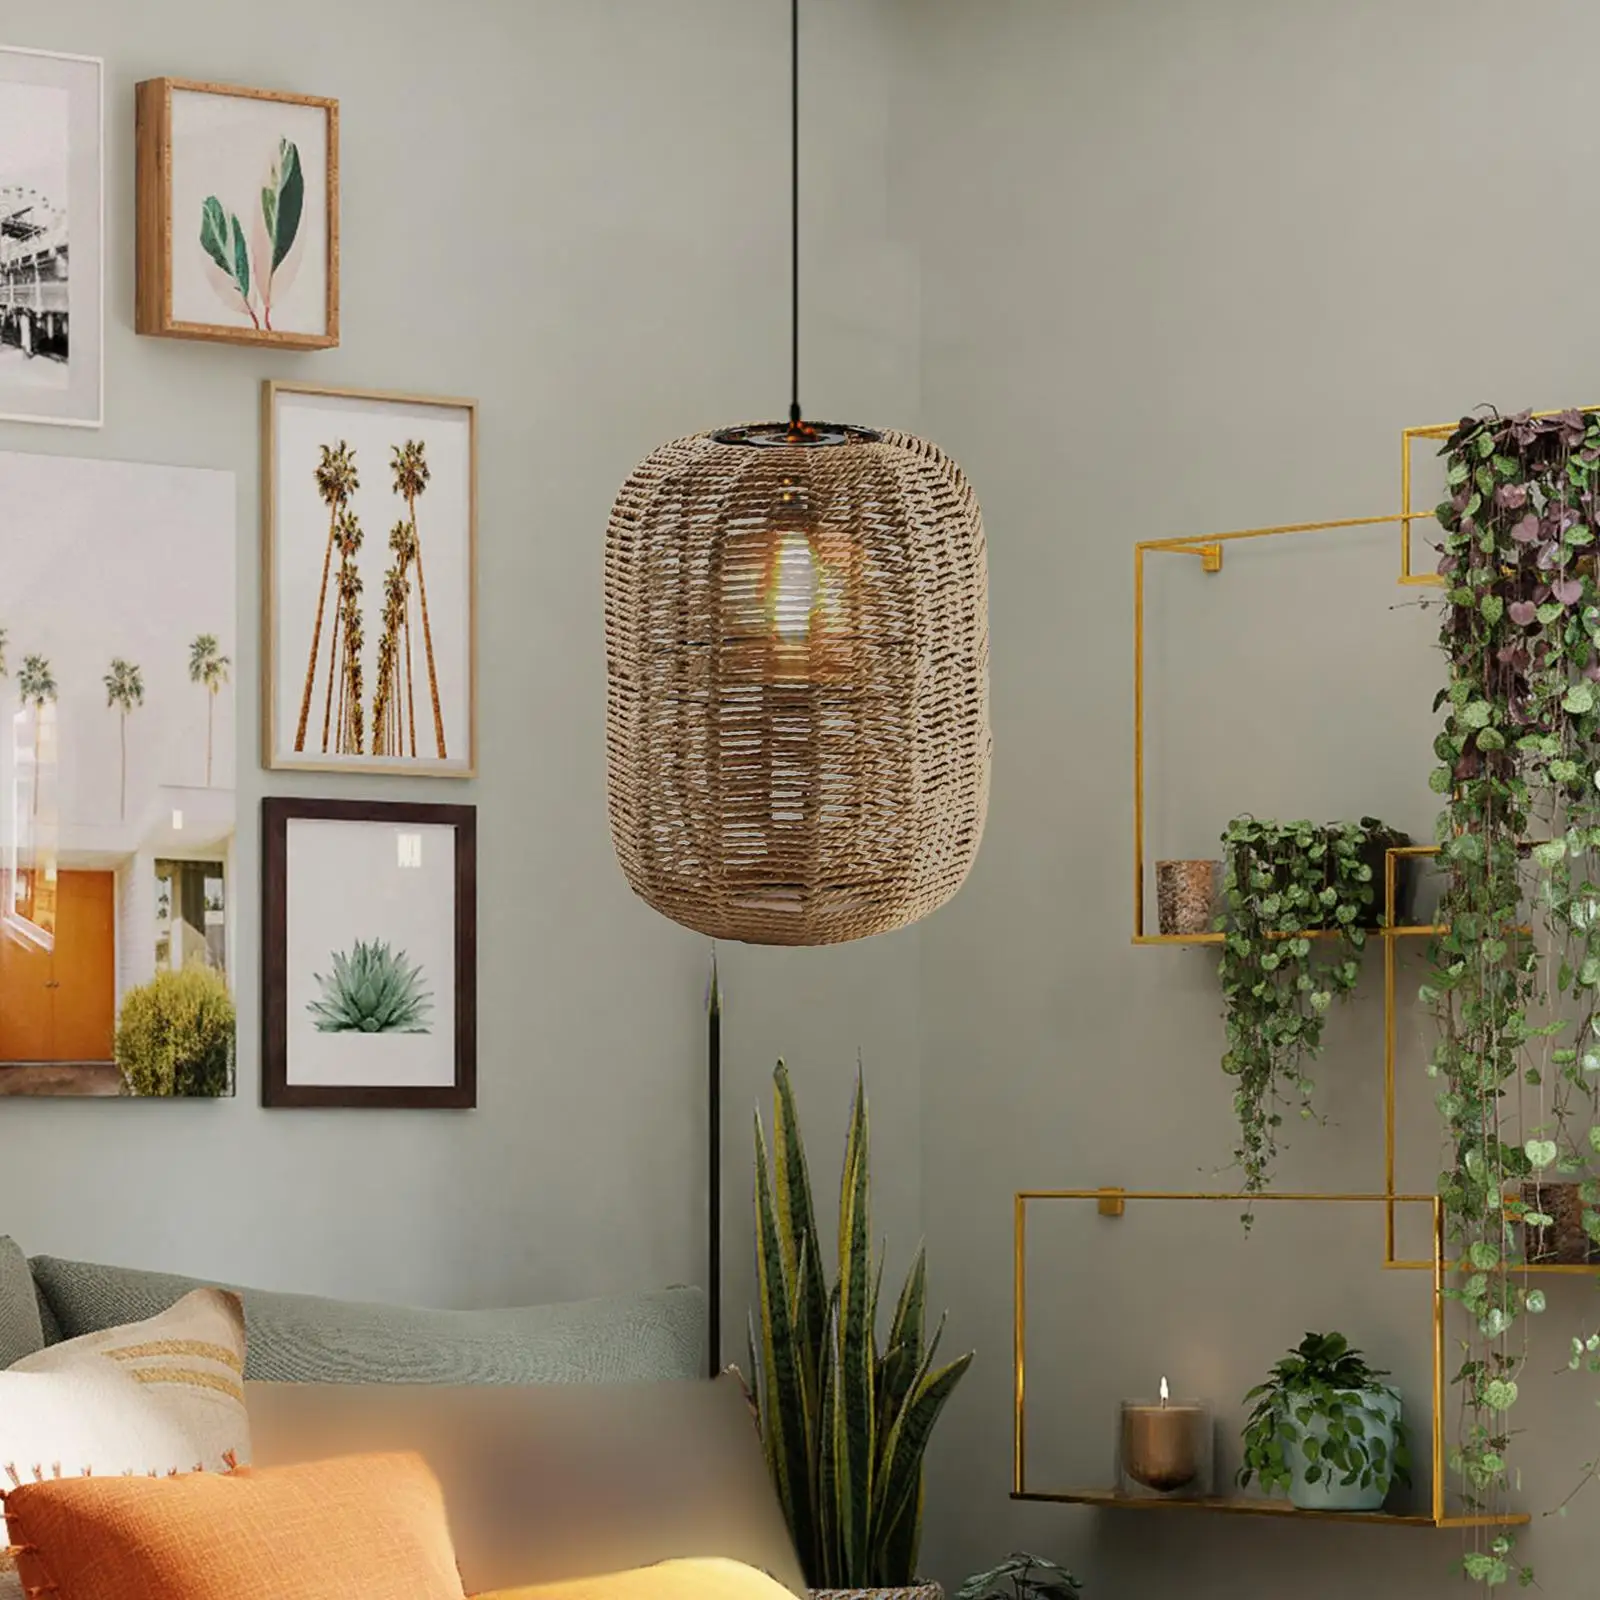 Retro Style Pendant Lamp Shade Woven Hanging Light Rope Fixture Lampshade for Restaurant Hotel Bedroom Dining Room Decor